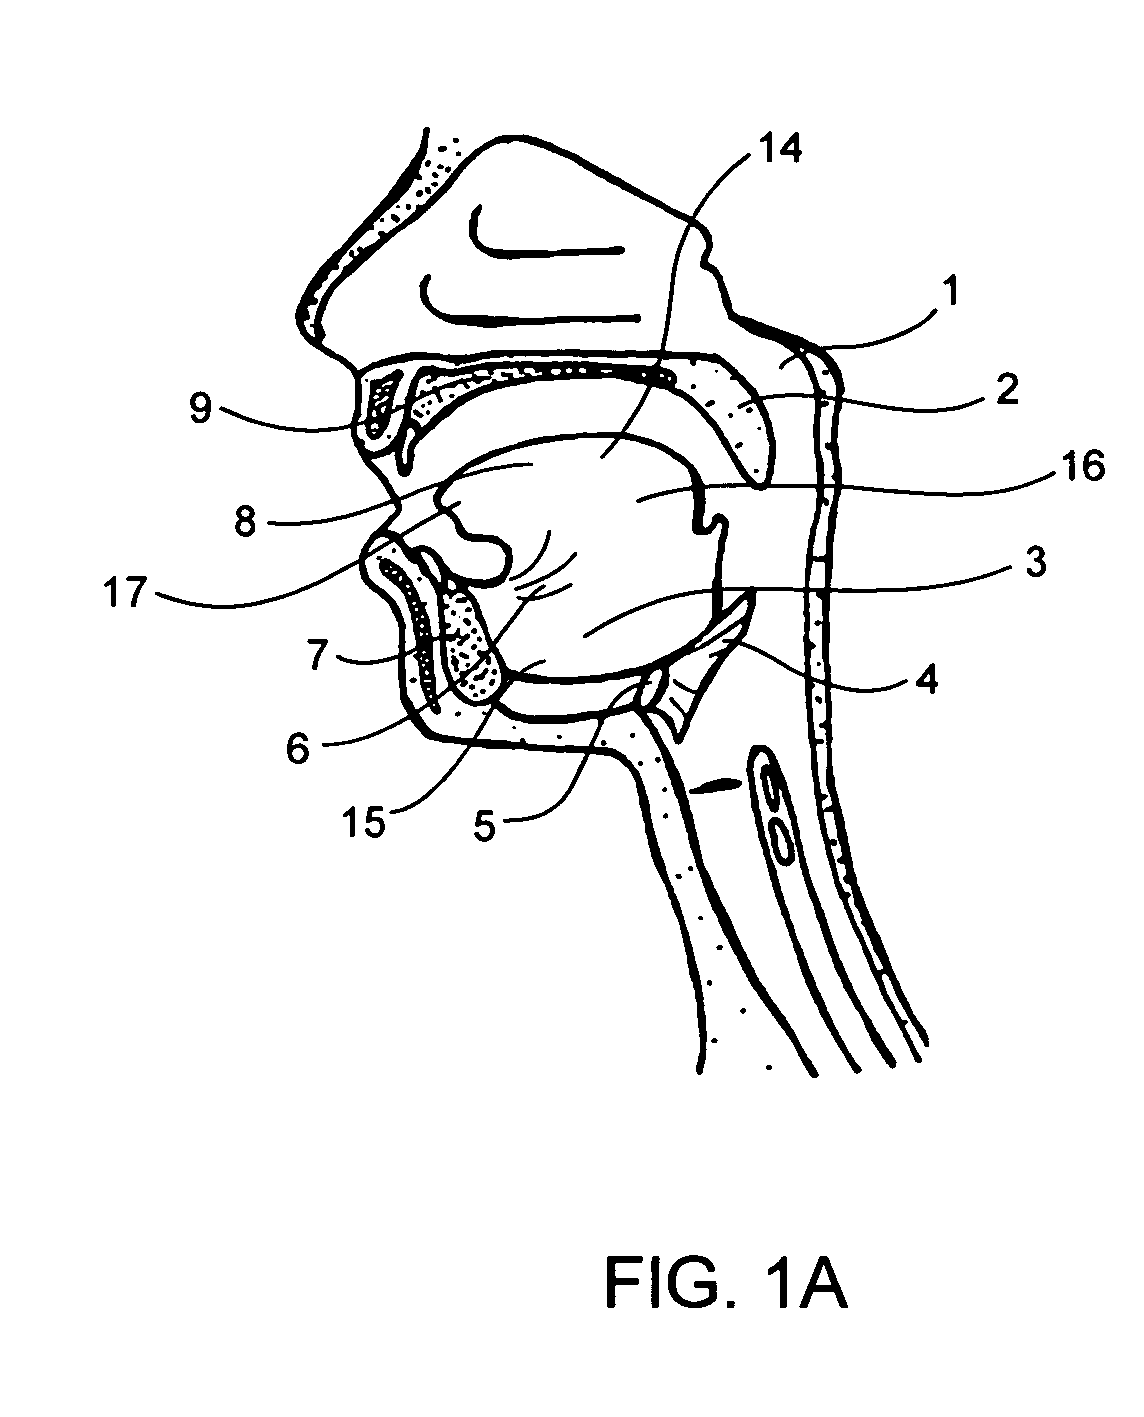 System to prevent airway obstruction